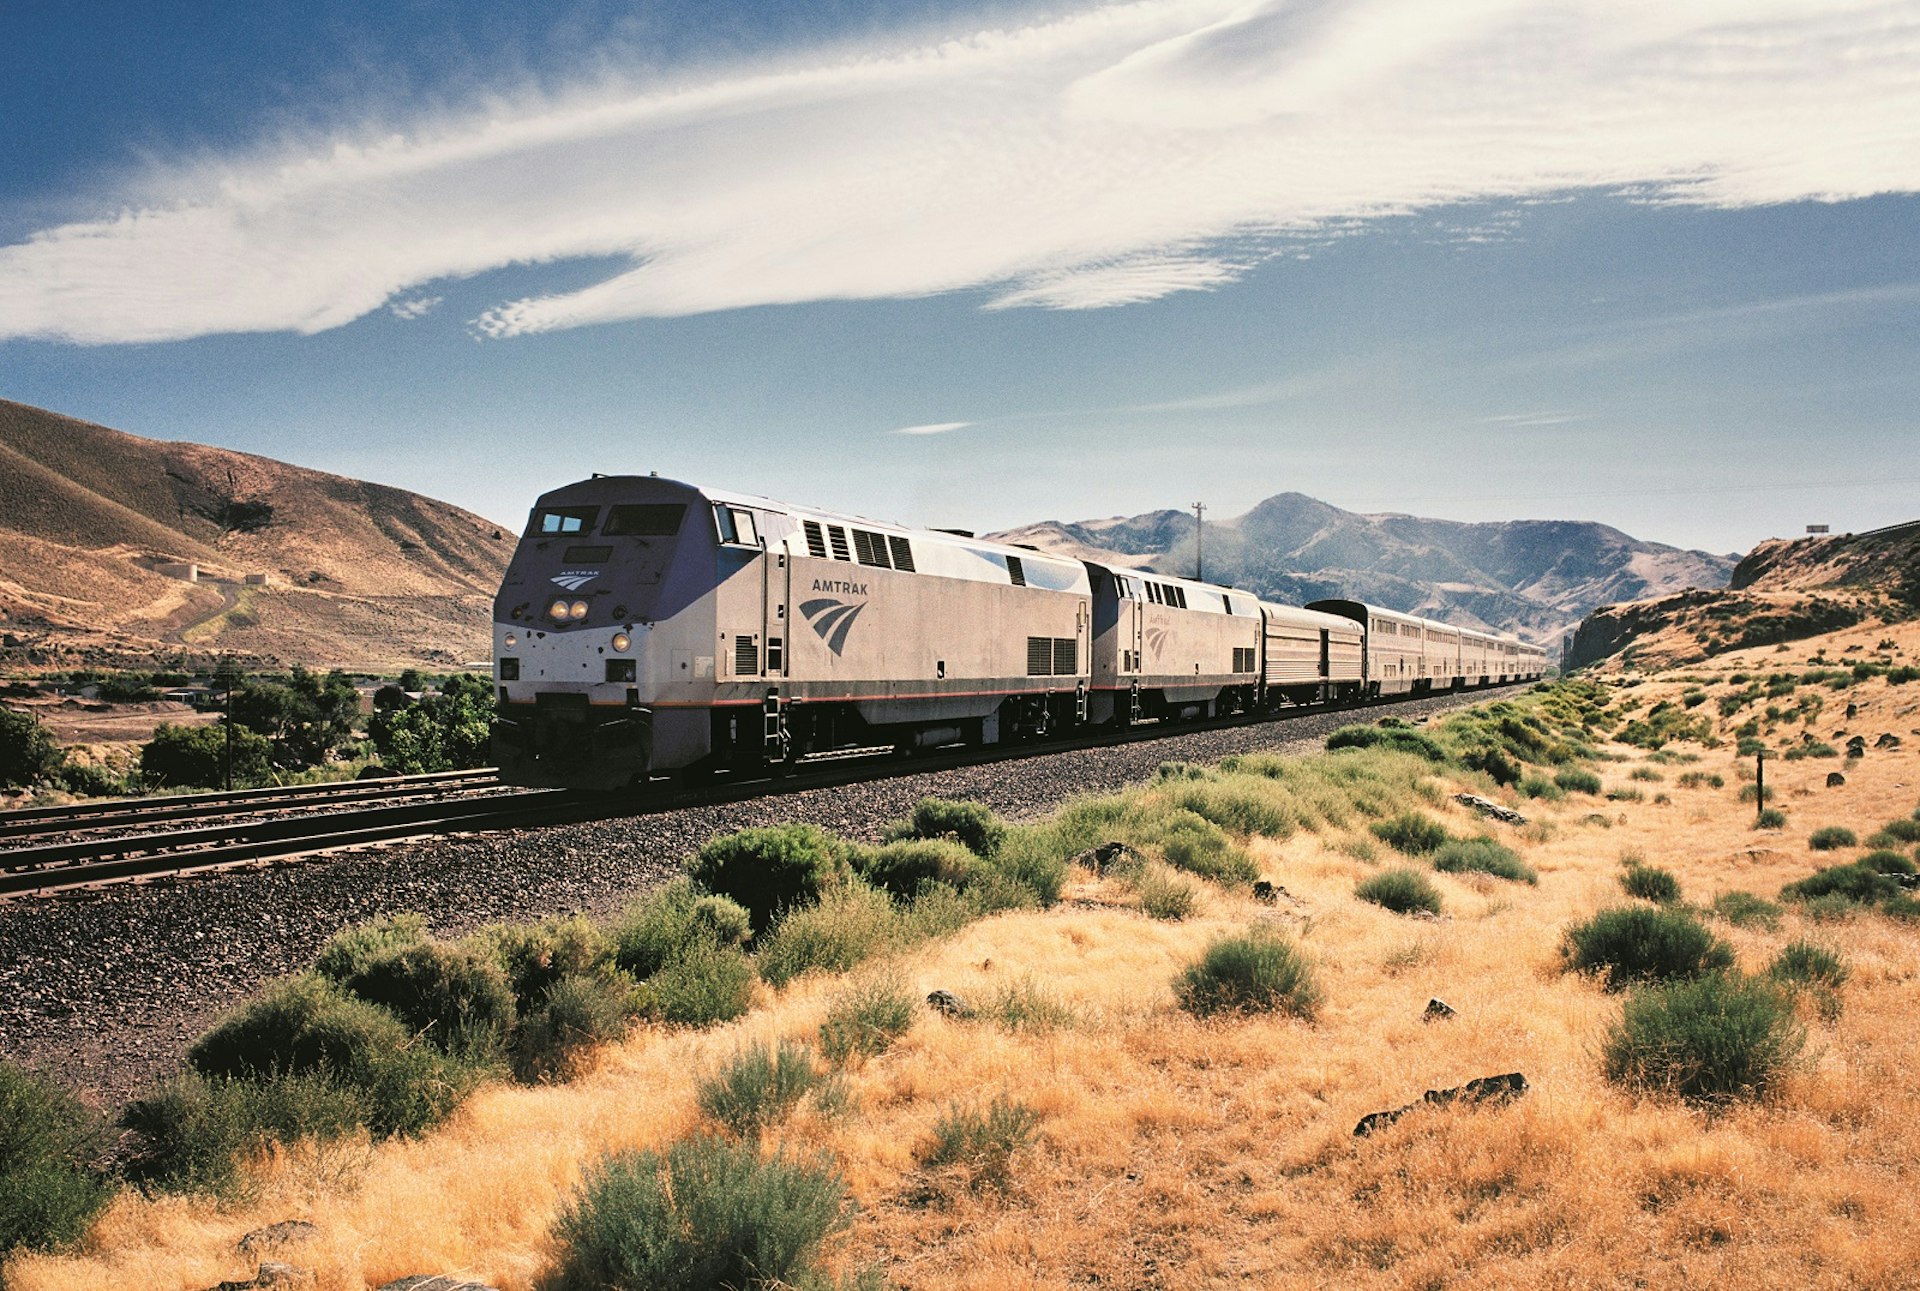 An Amtrak train passing on tracks through the US countryside